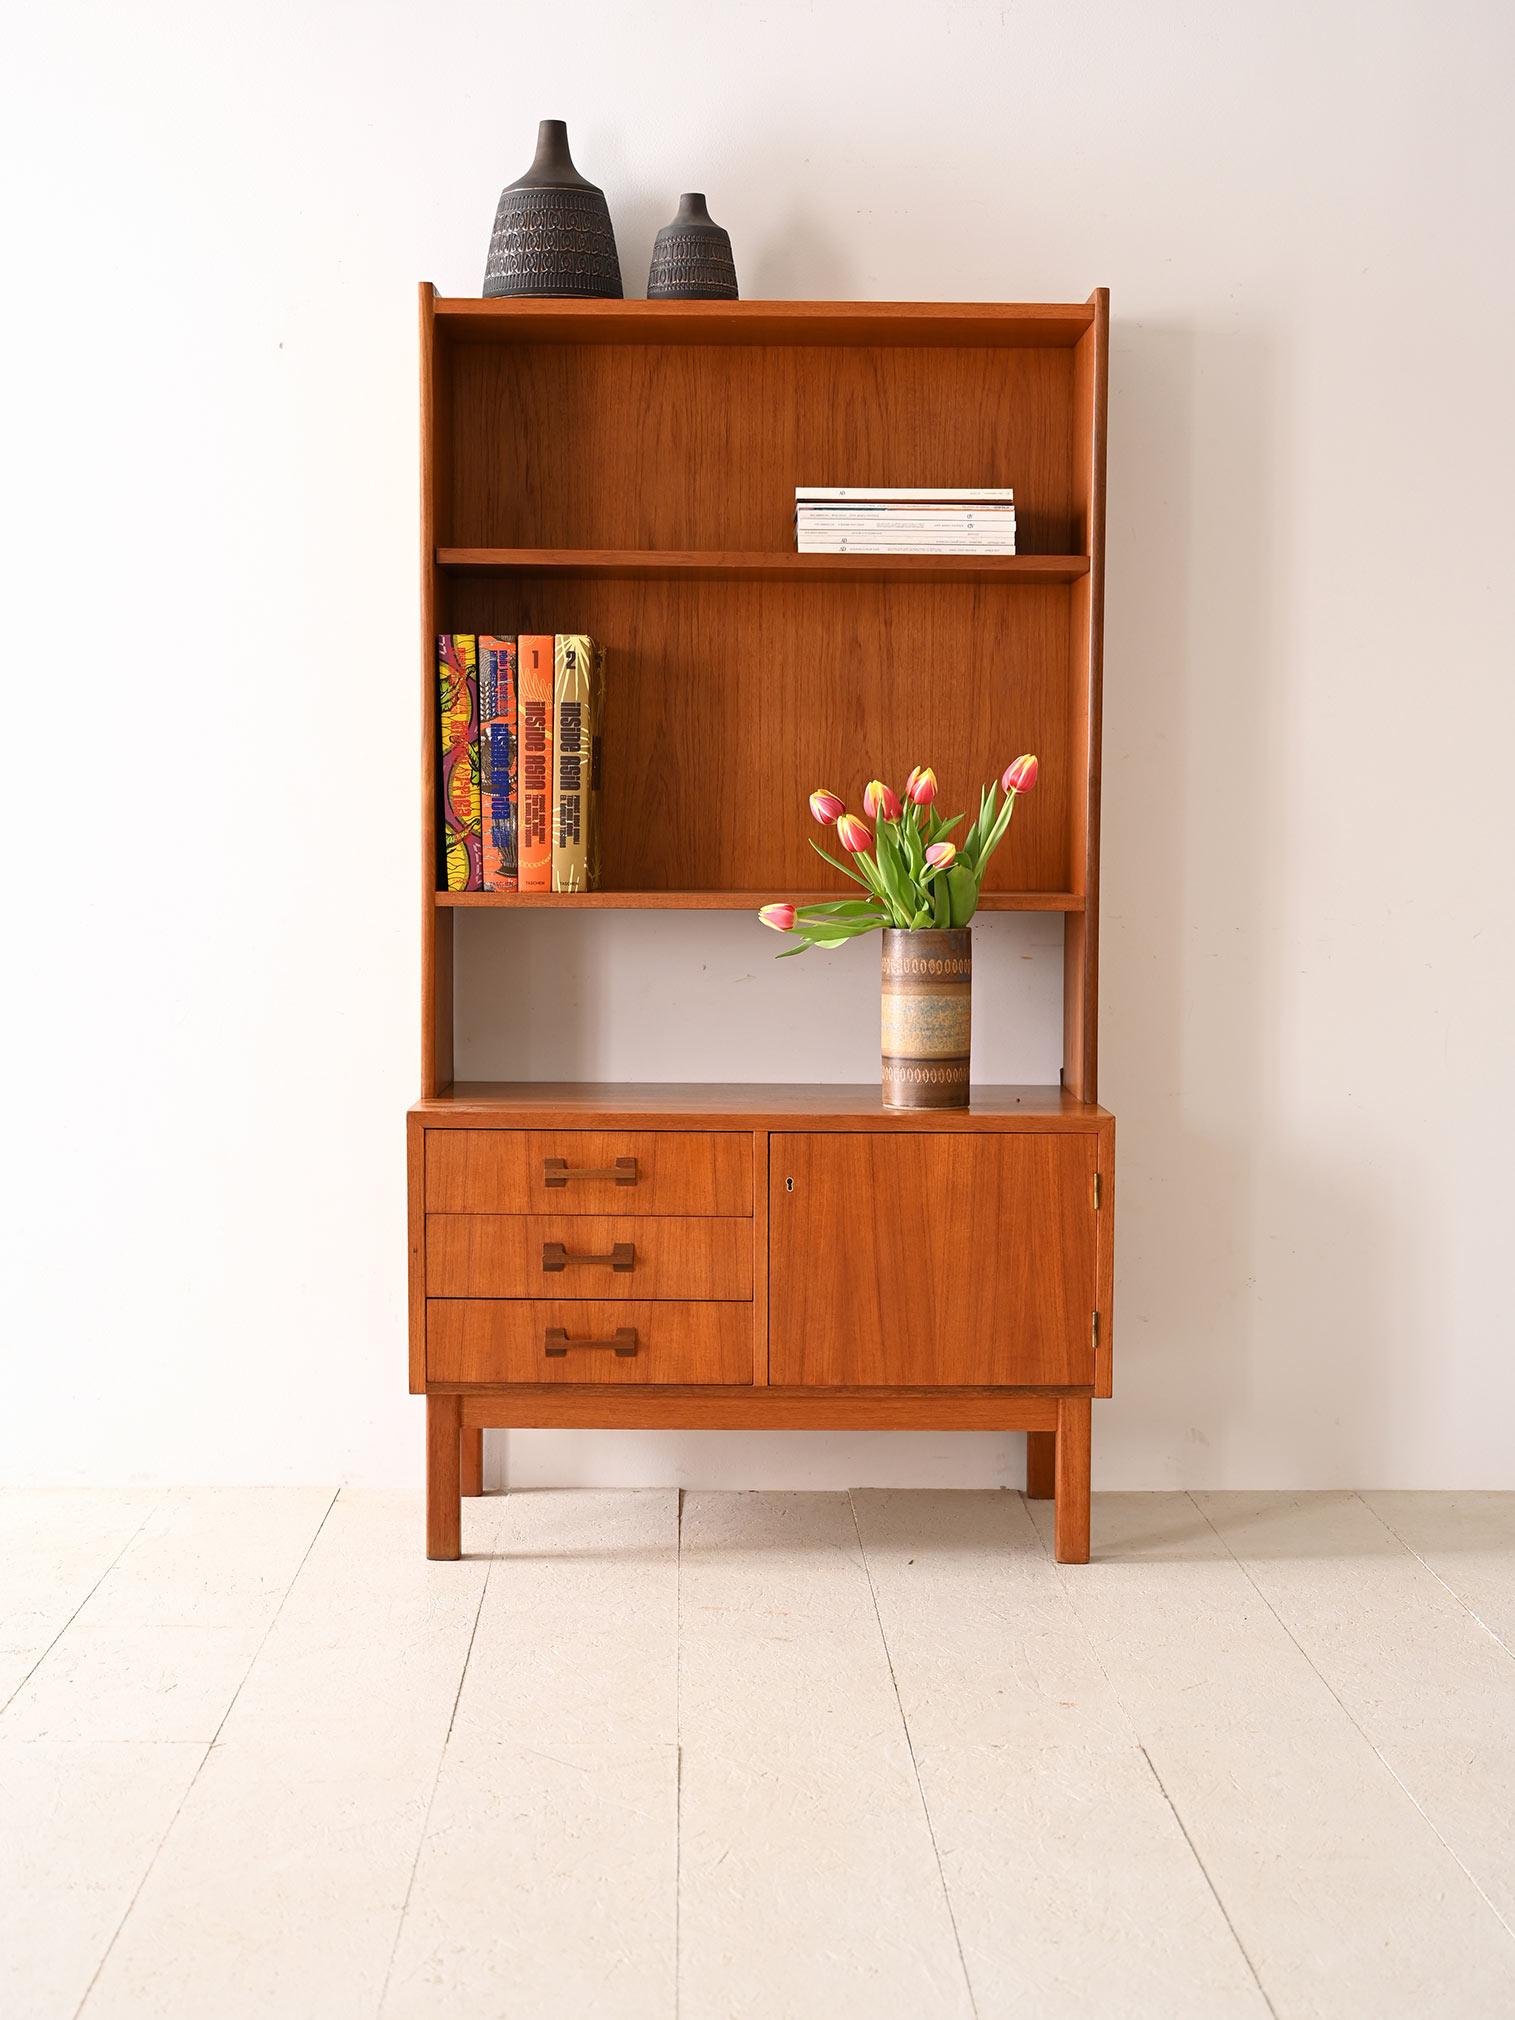 Original 1960s vintage teak cabinet with shelving. This versatile bookcase consists of a low cabinet and a shelf structure. The low cabinet features a storage space closed by a hinged door equipped with a lock and three drawers with wooden handles.